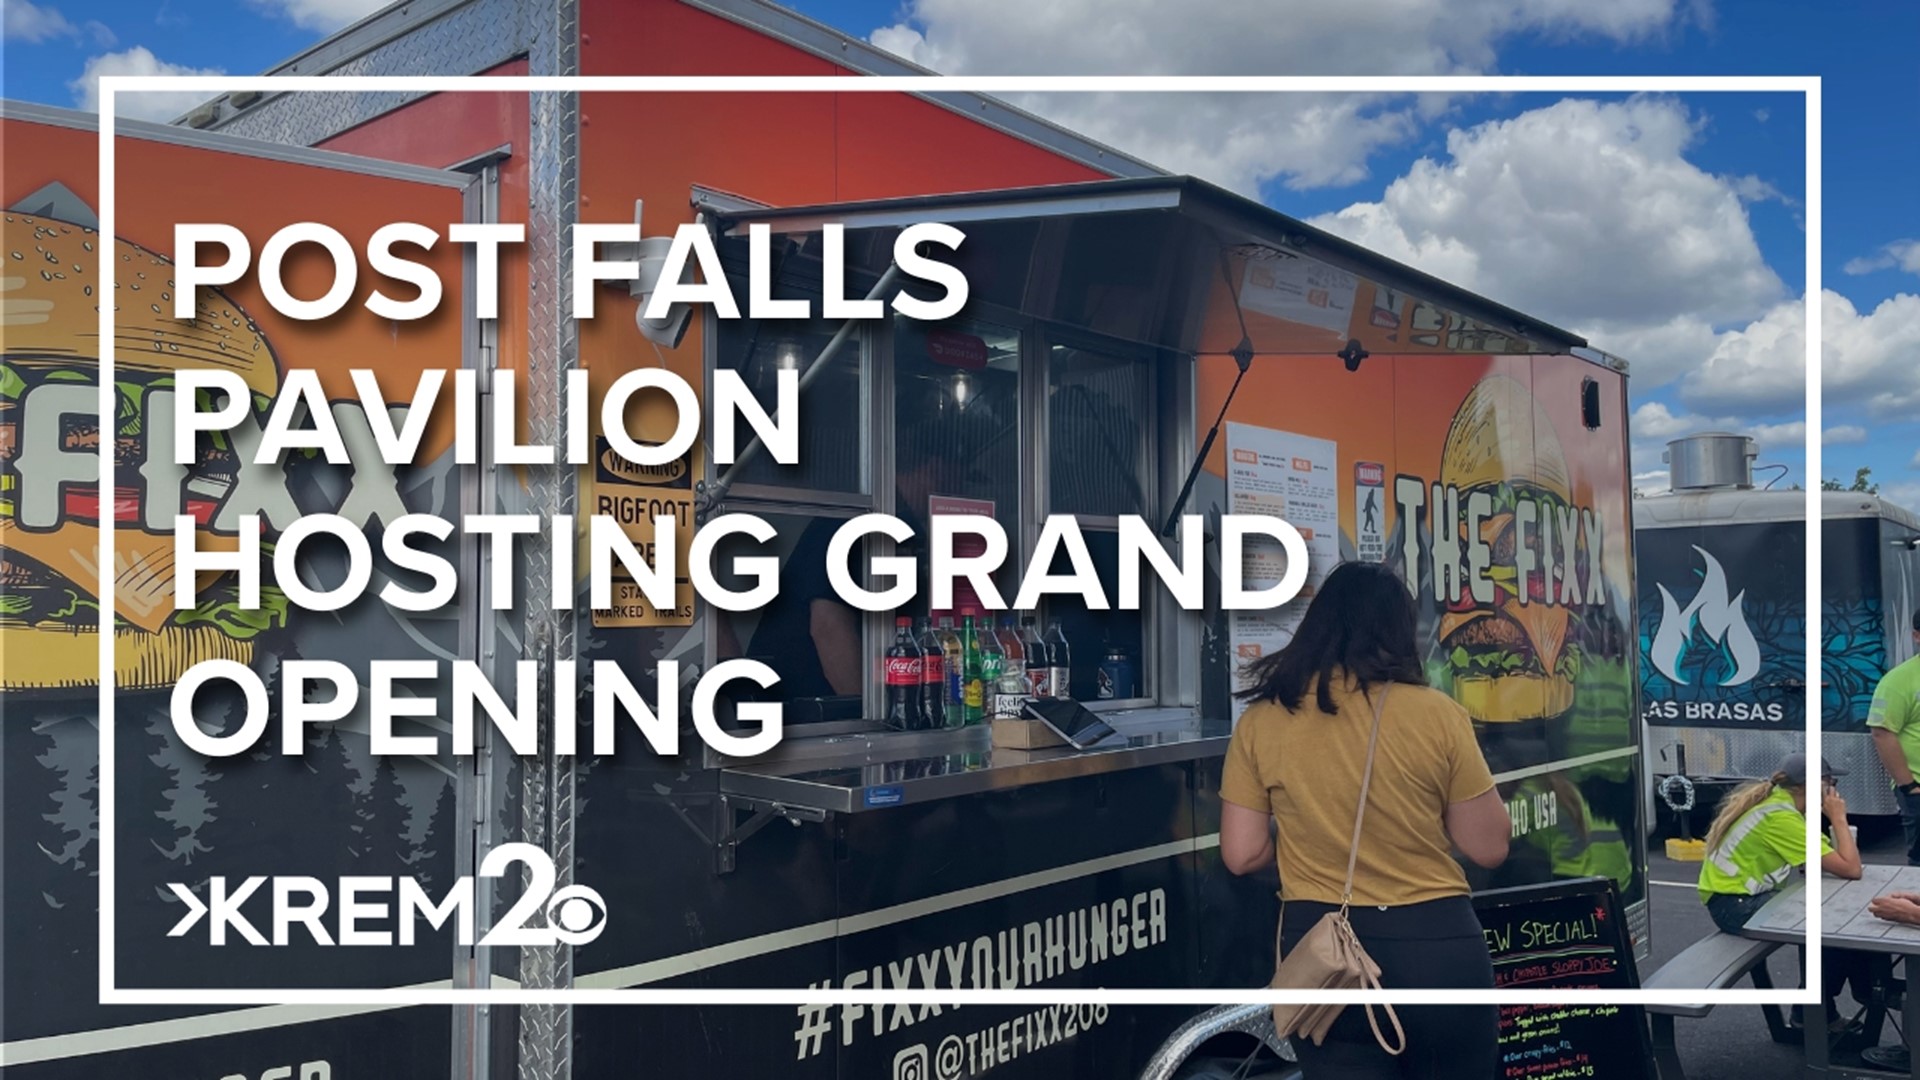 The Pavilion features more than 15 different food trucks including ice cream and fresh baked cookies on location.